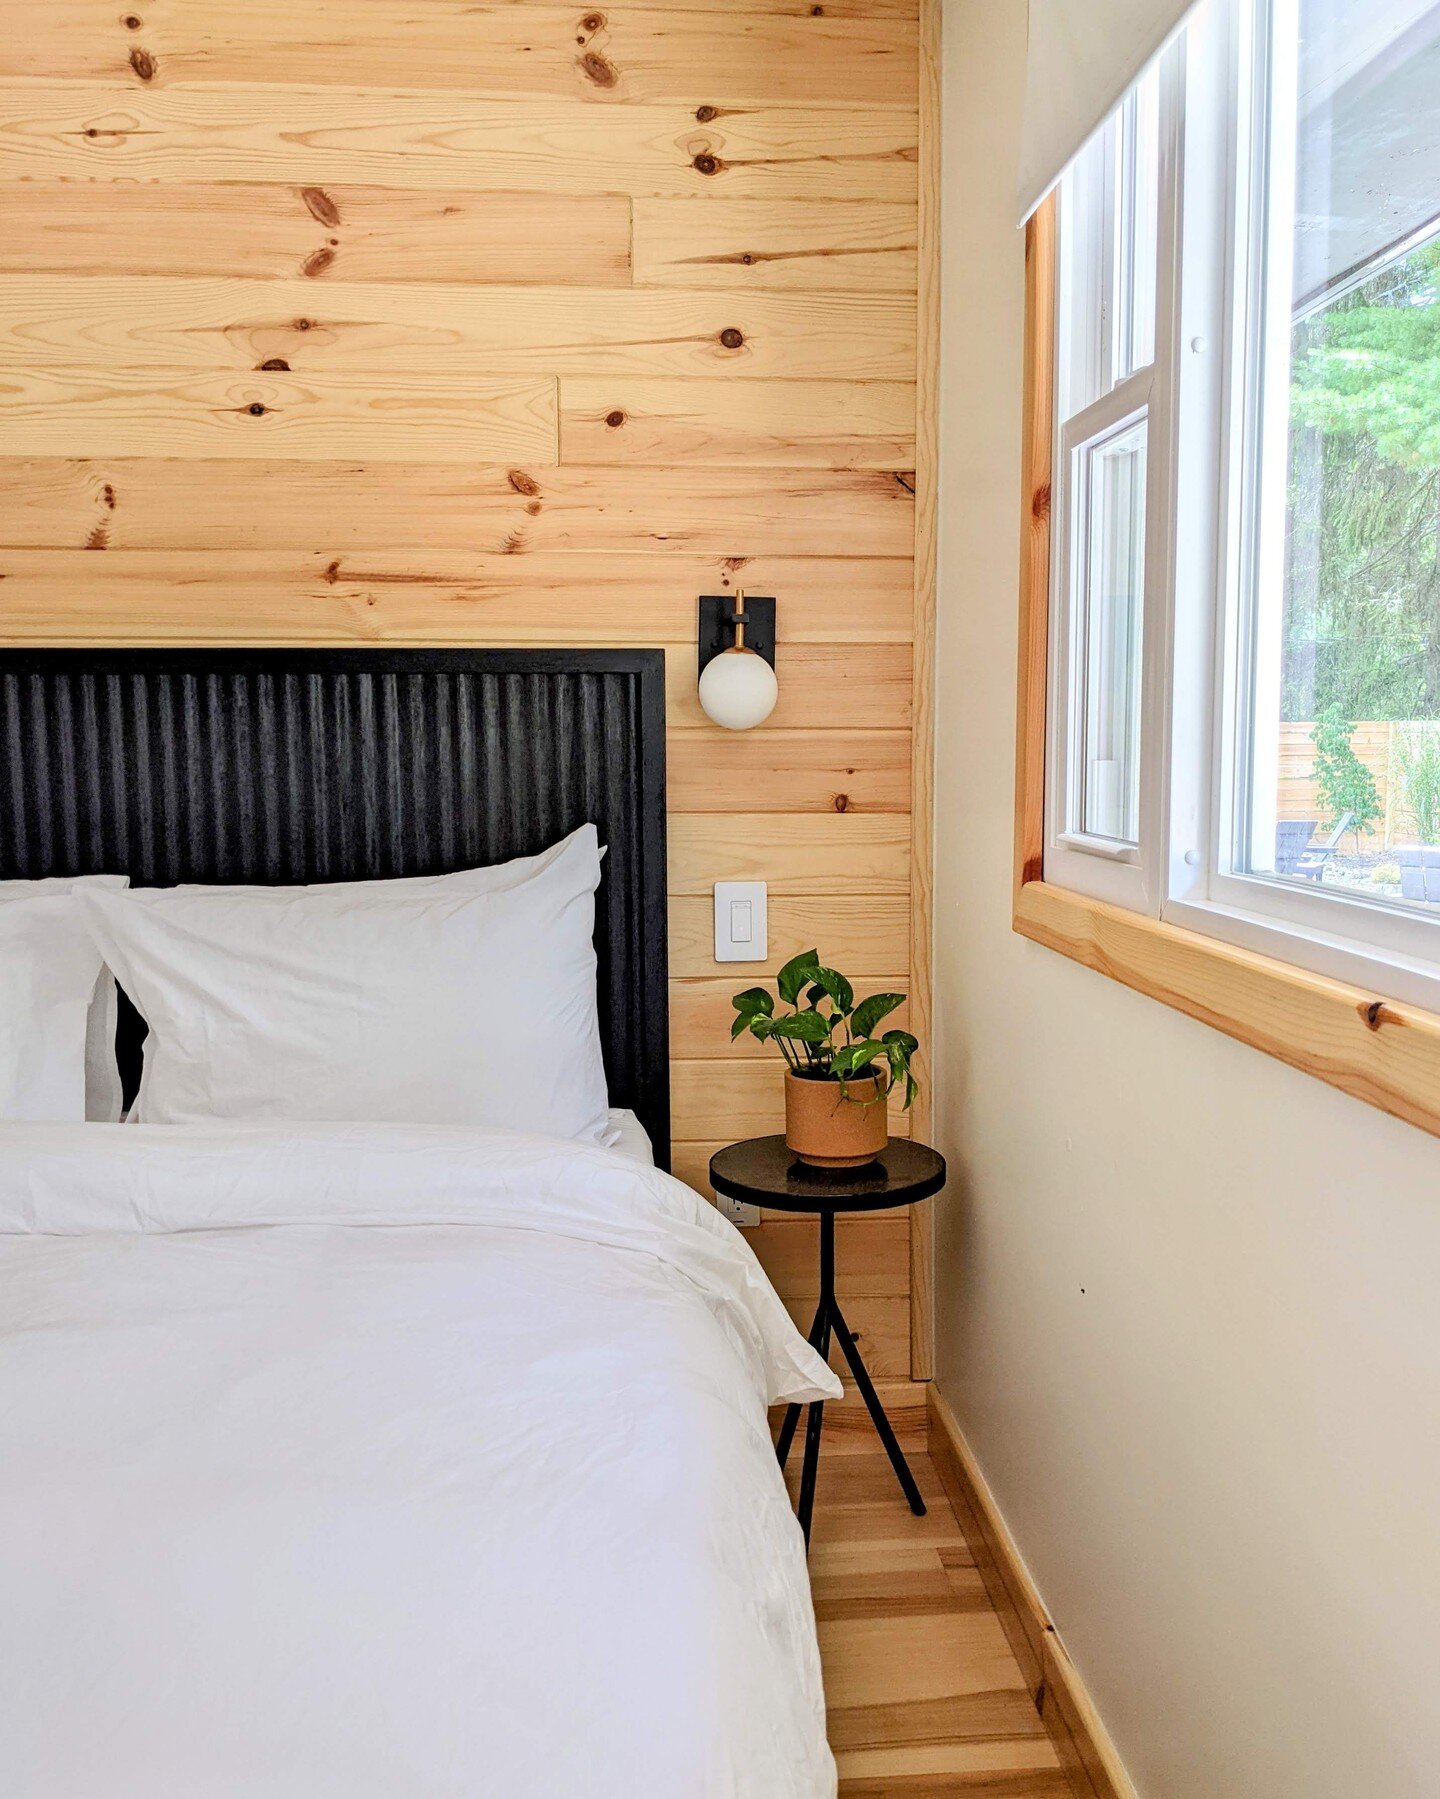 New blog post is up for a quick review of The Rex Hotel @staytherex It was my first time visiting The Poconos and I loved it!
.
.
.
#boutiquehotel #uniquehotel #newblogpost #newpost #nycblogger #petiteblogger #cabinliving #cabinlife #moderncabin #wee